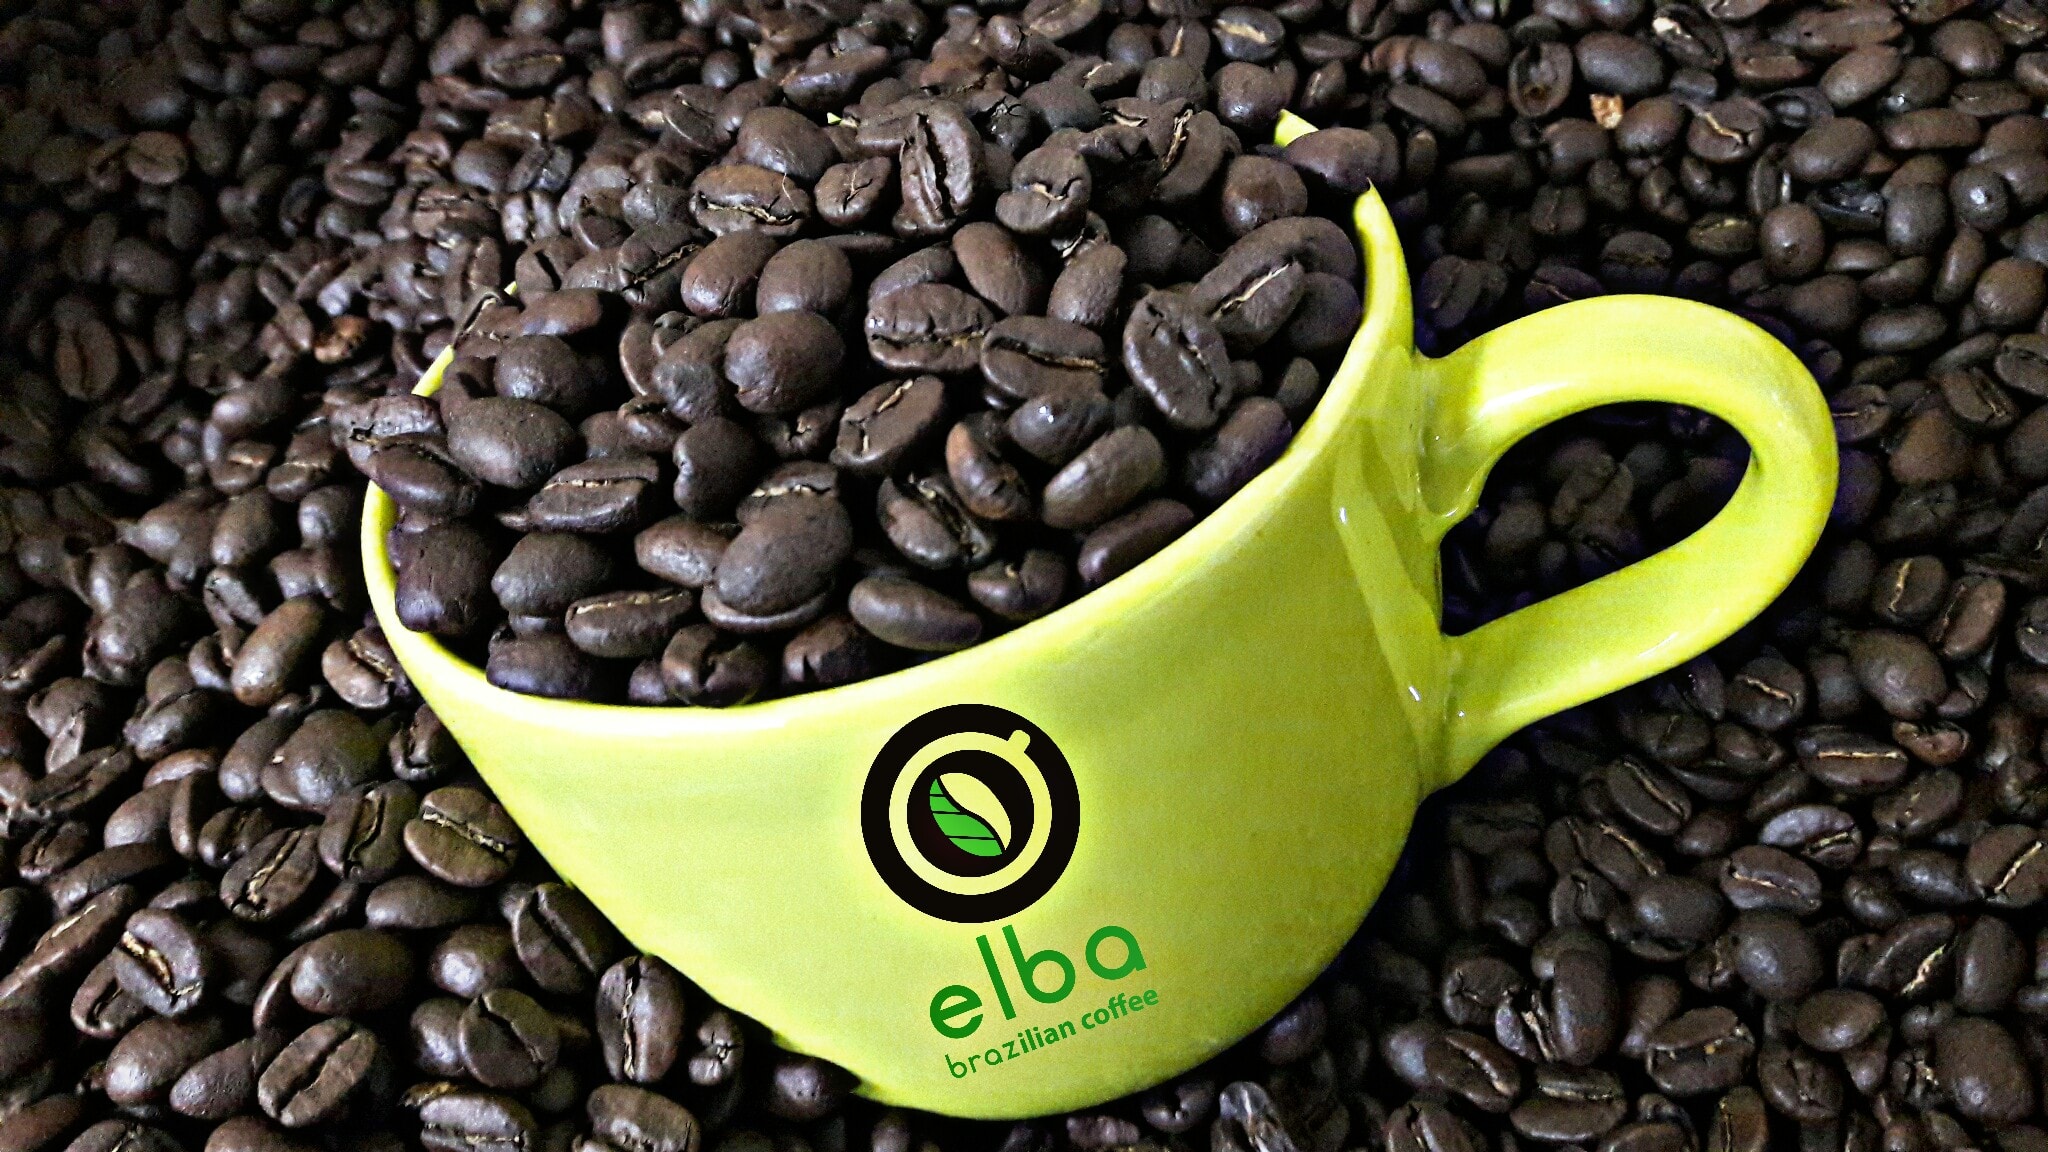 Our products – Elba Brazilian Coffee